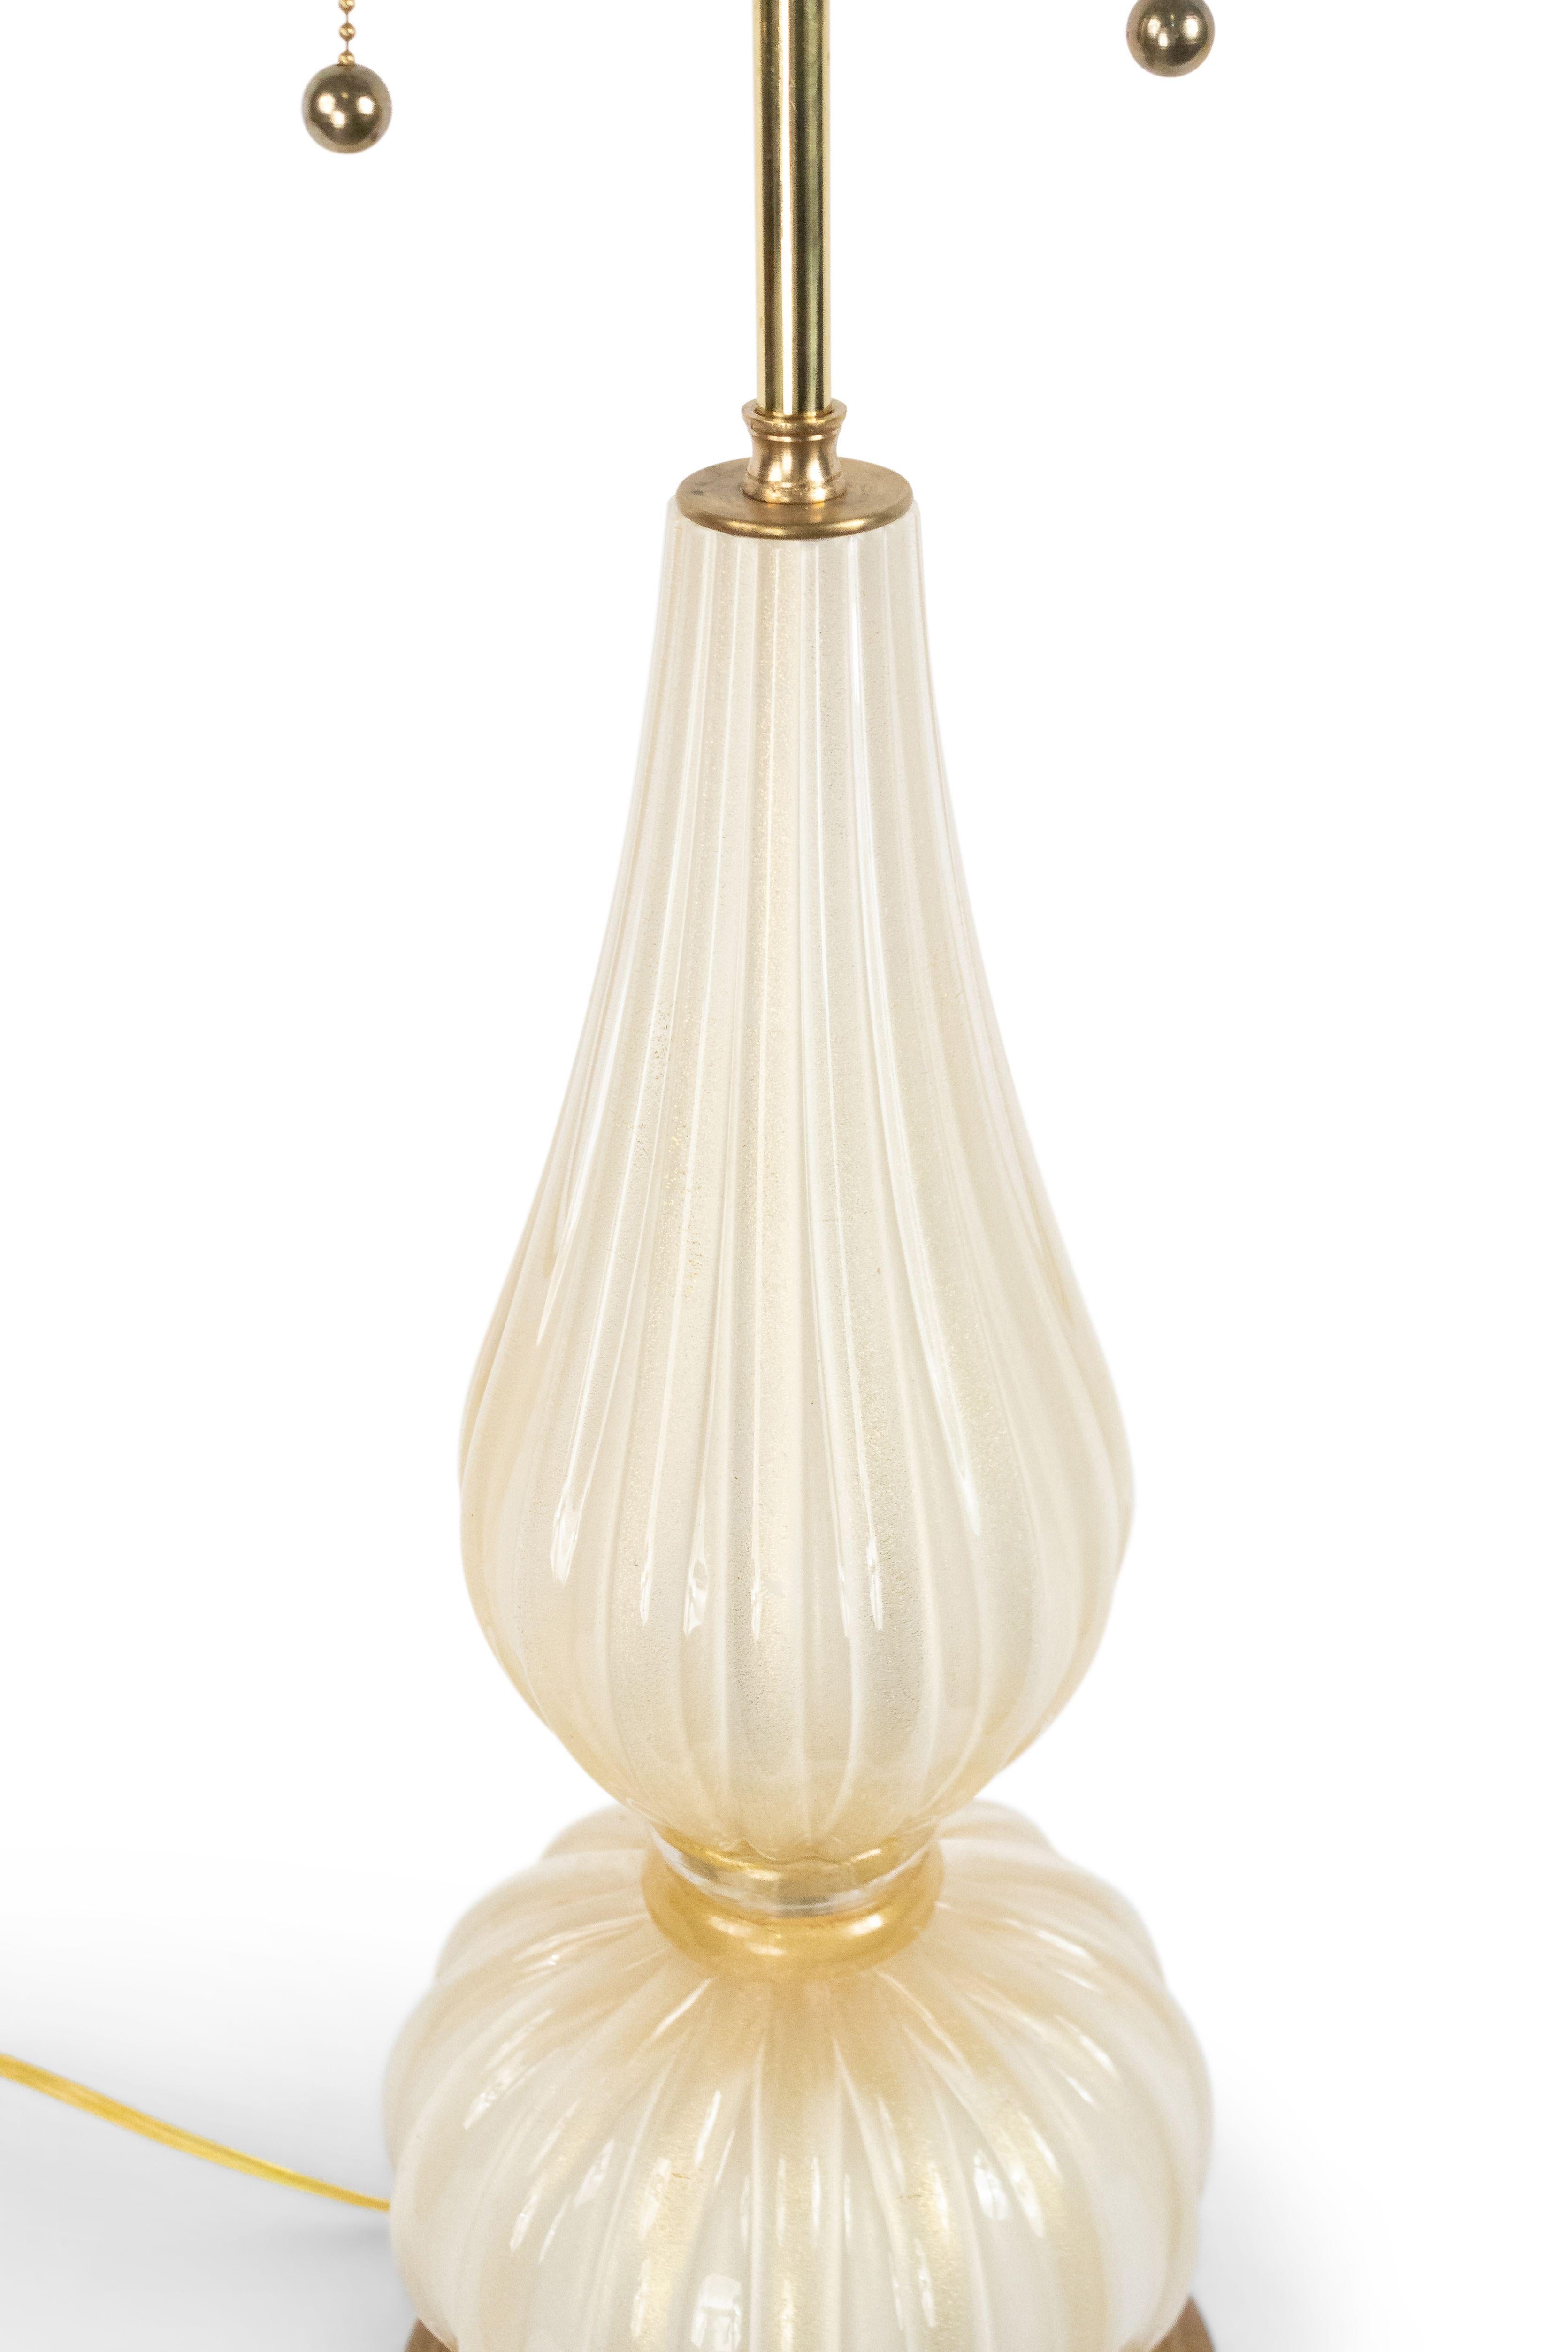 Italian 1940s style white glass and gold dusted table lamp with a large fluted ball base over a shaped fluted section and resting on a modern round wood base.